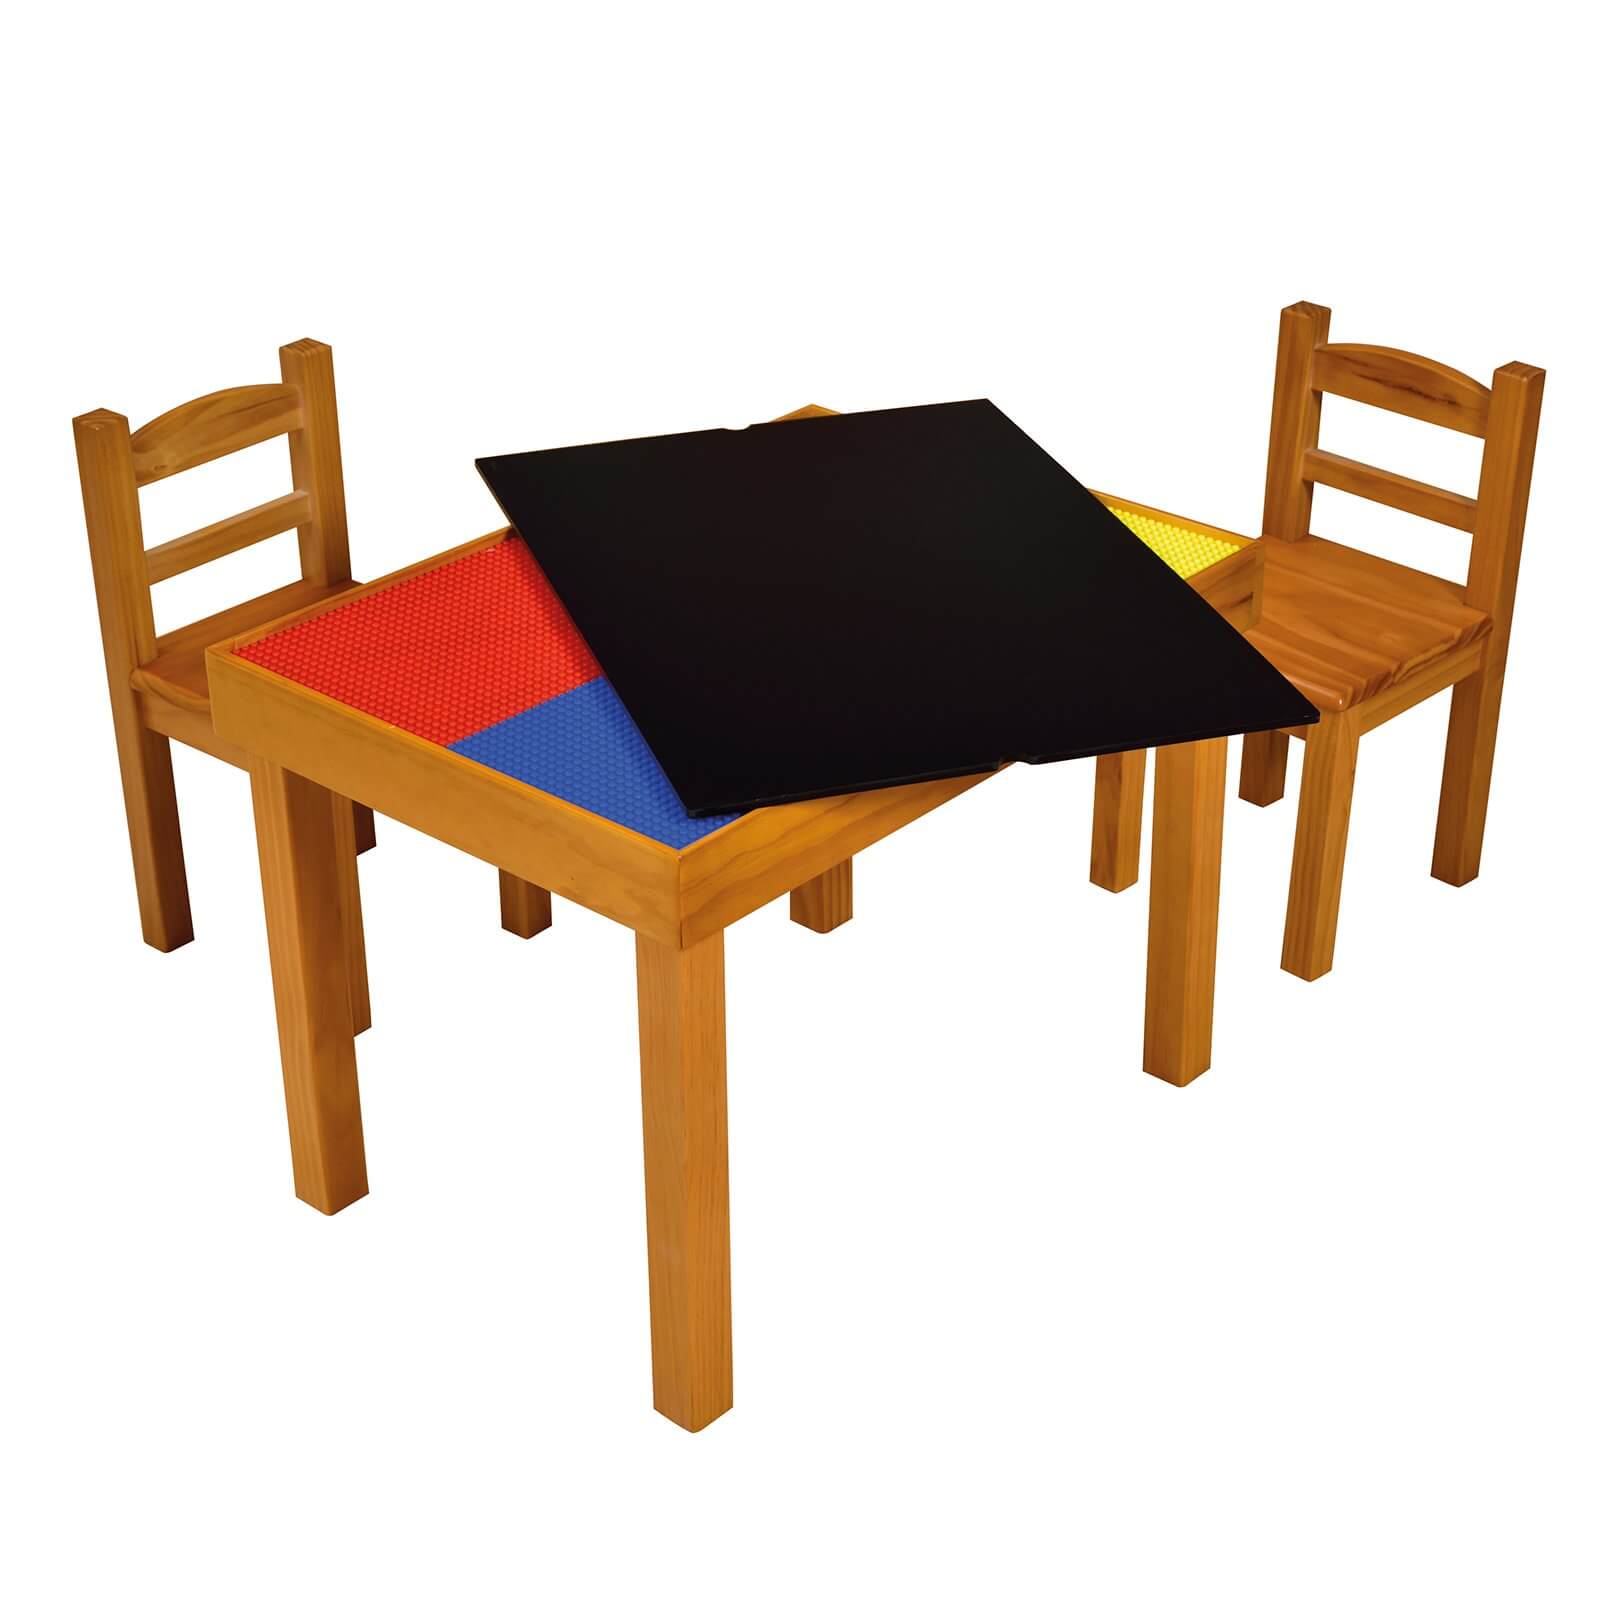 Photo of Wooden Activity Table And Chair Set